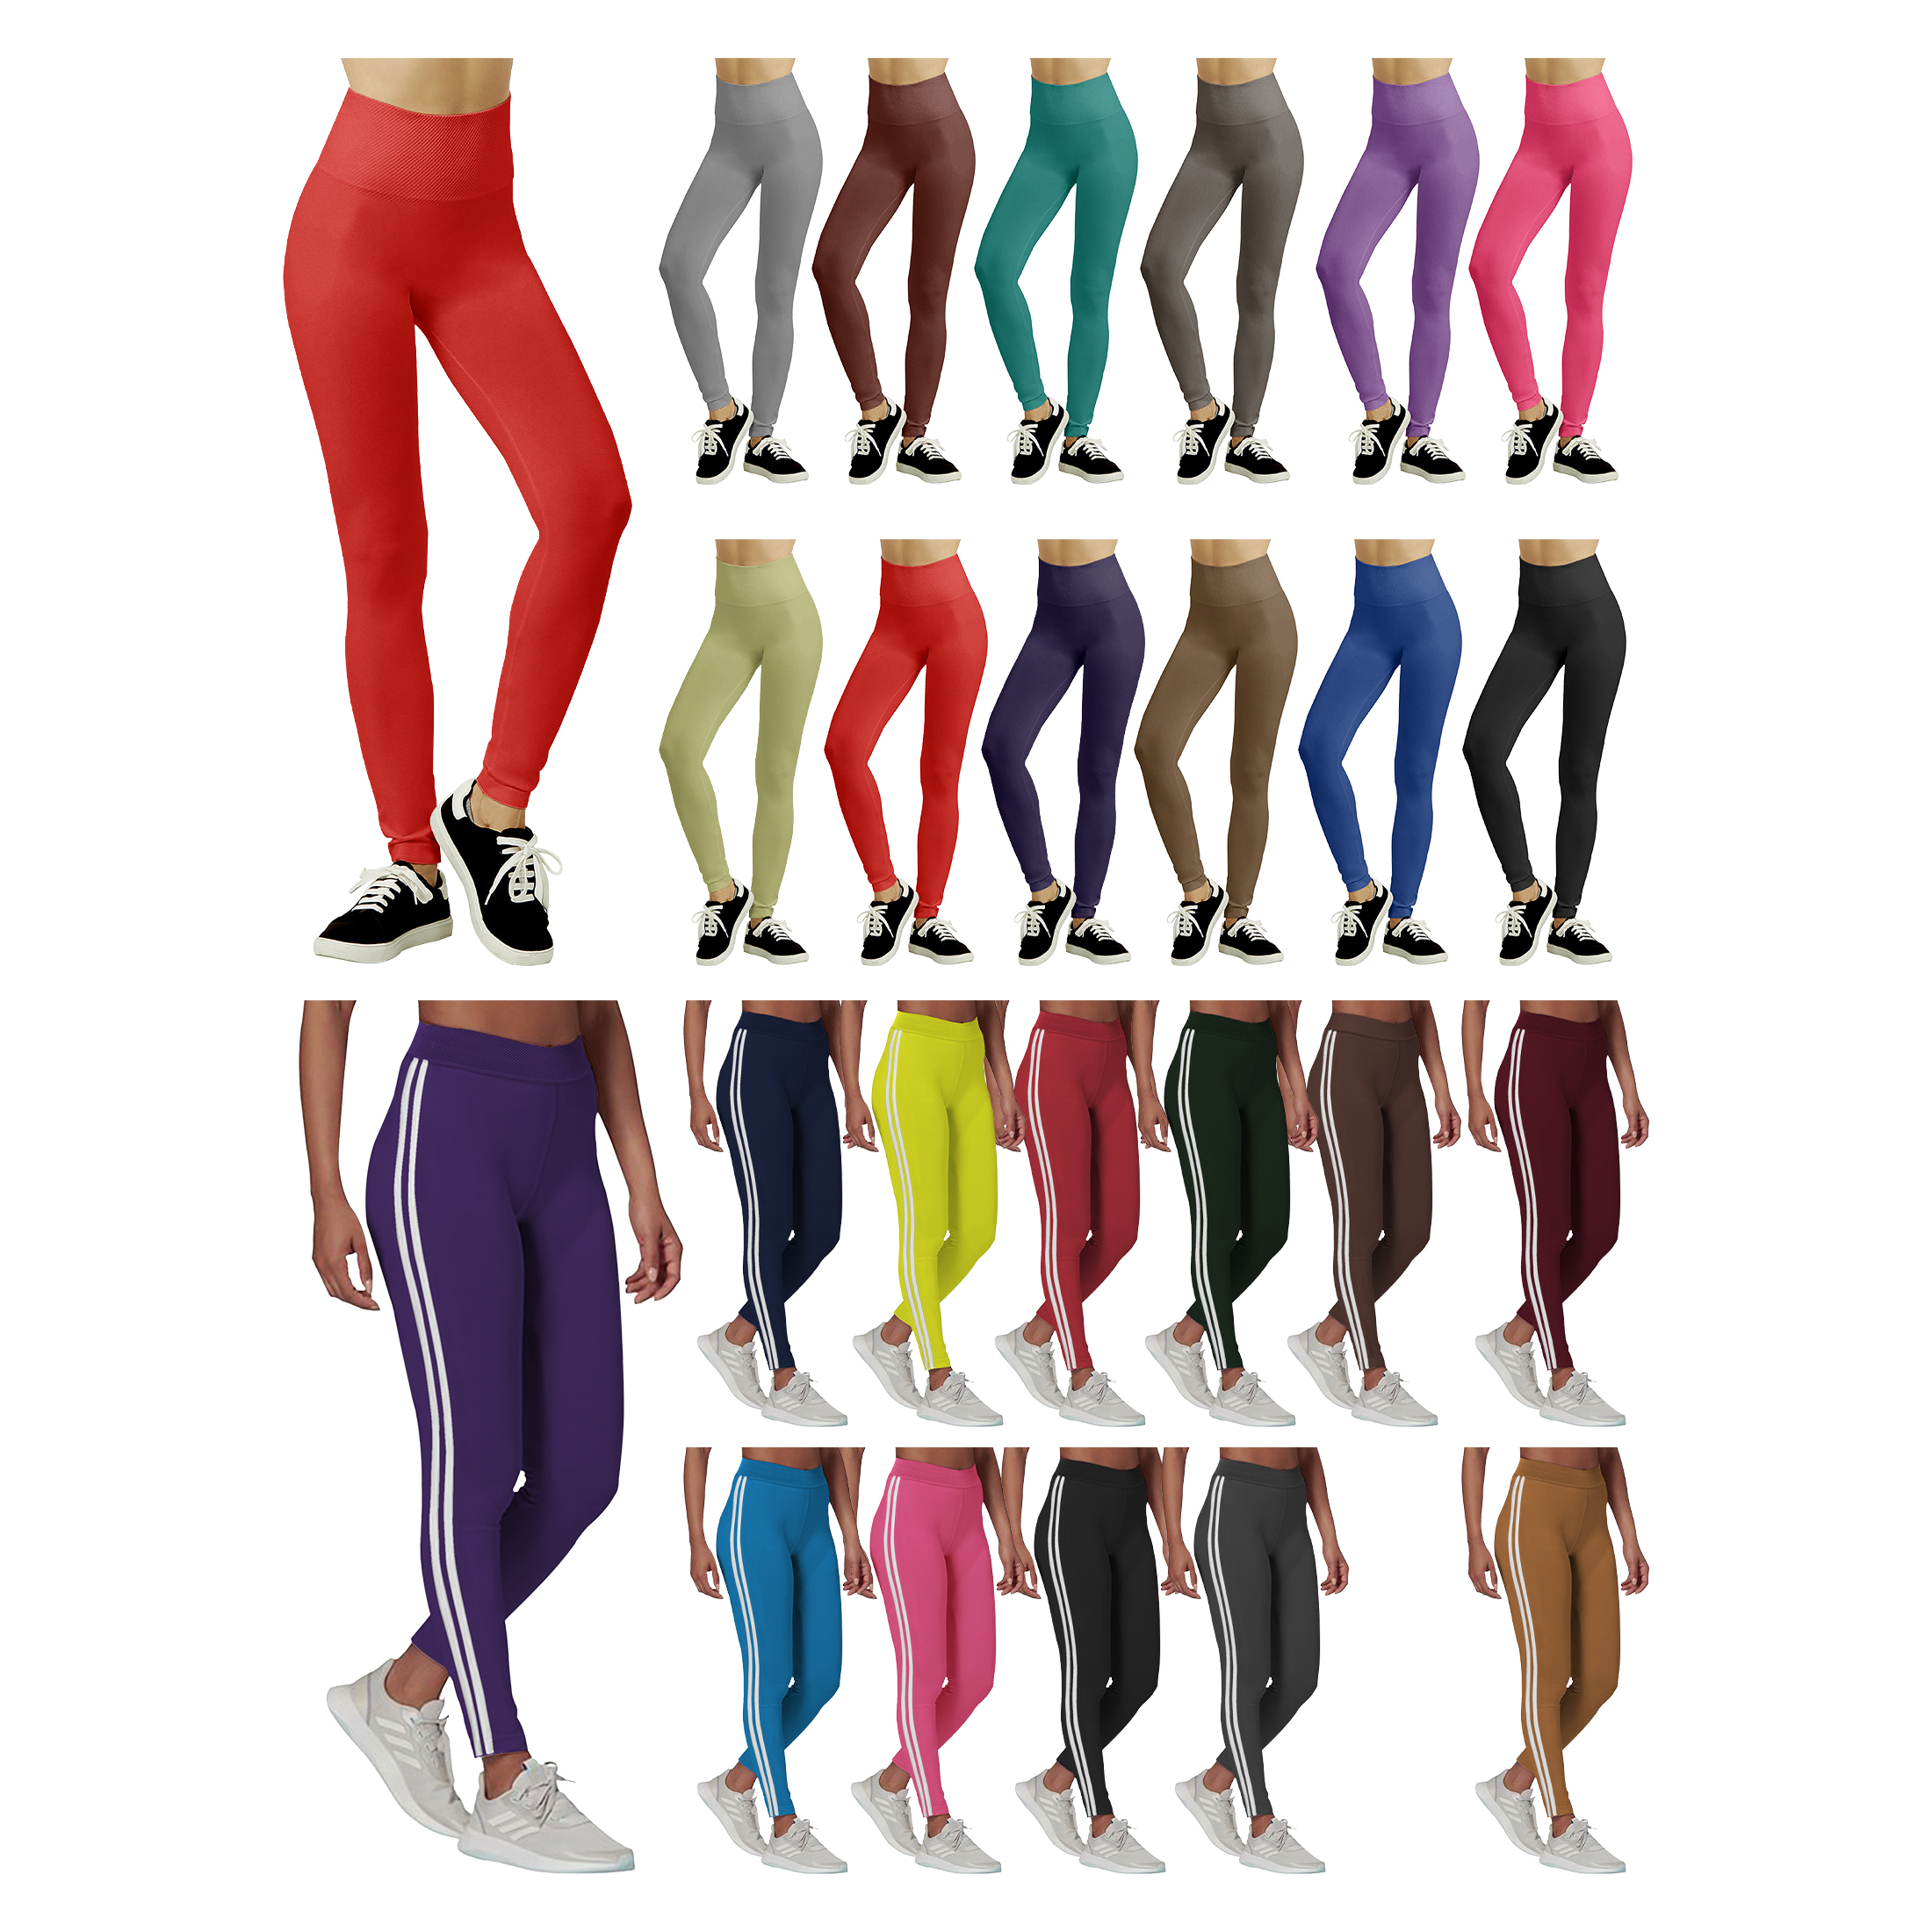 2-Pack: Women's Fleece-Lined High Waisted Workout Yoga Leggings - Solid & Striped, Large/X-Large